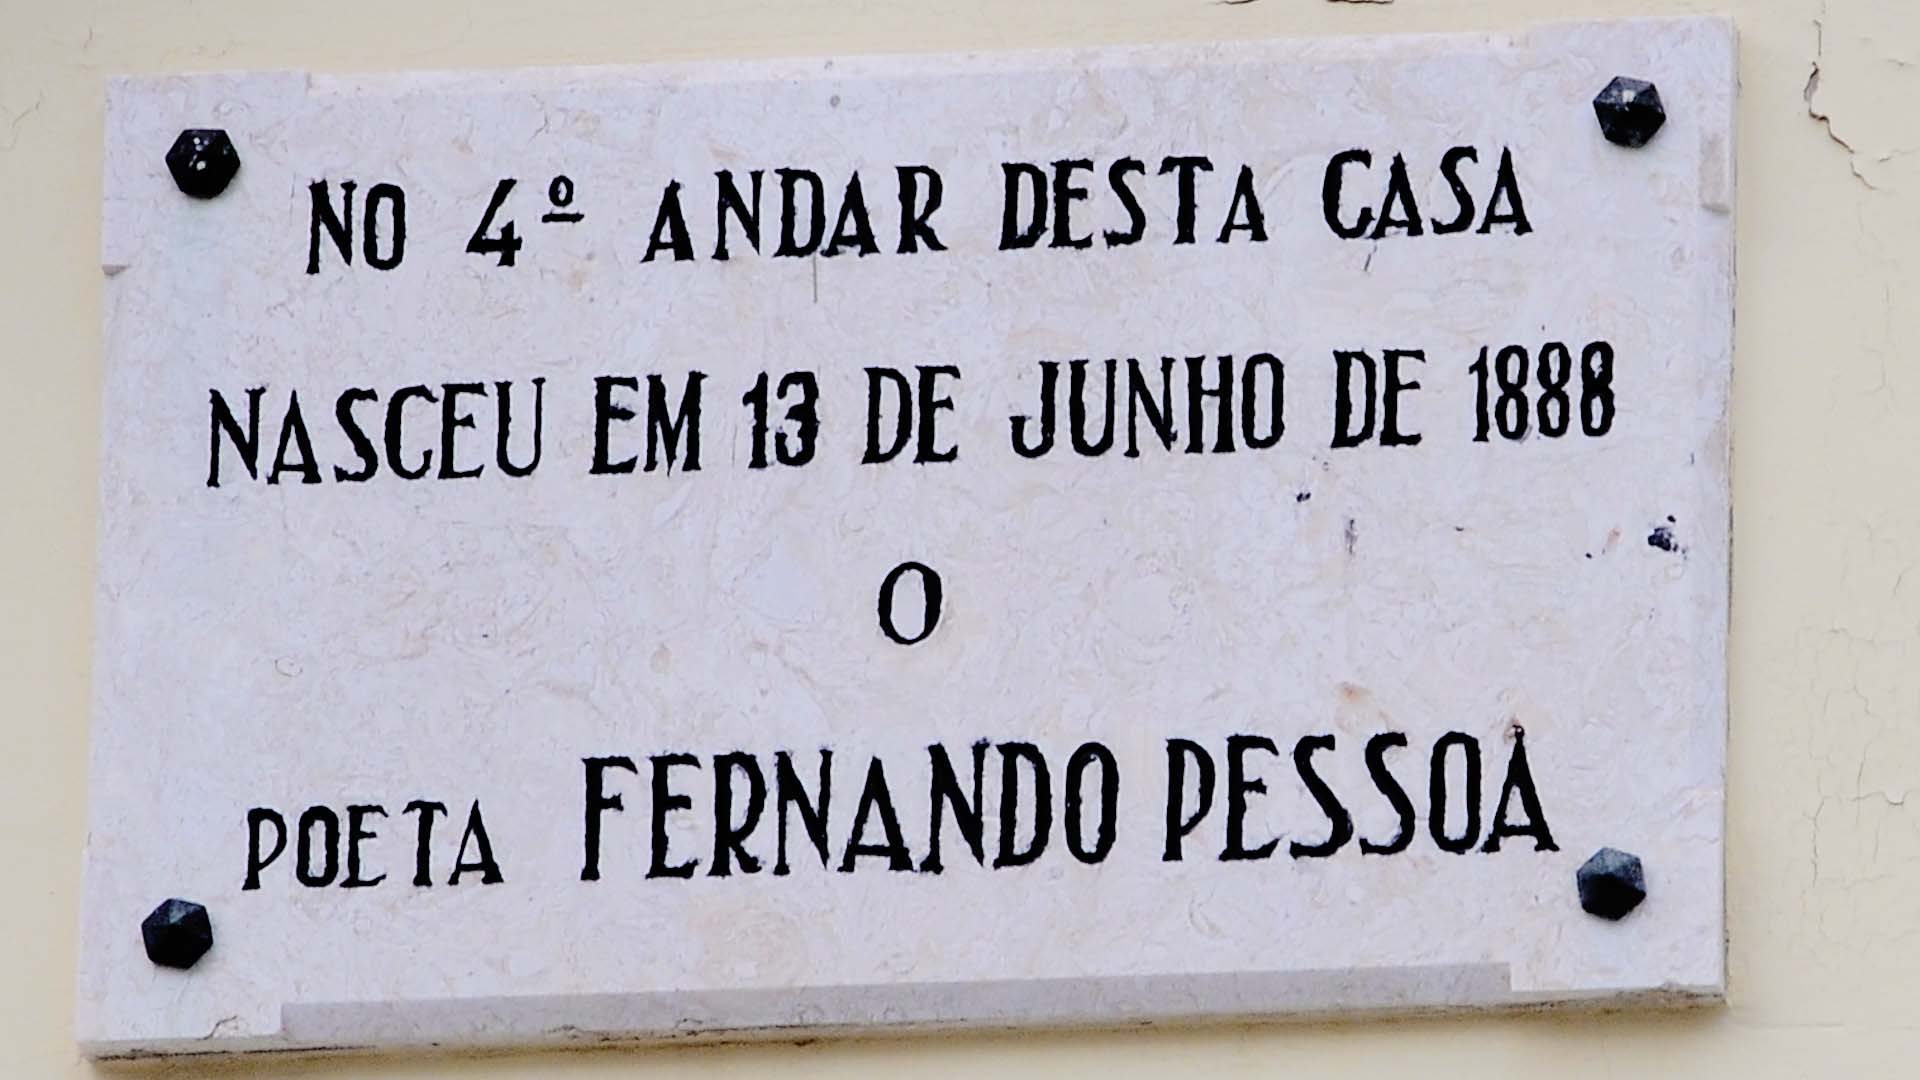 Plaque in front of Fernando Pessoa's home in Lisbon, Portugal, stating that he was born there in 1888